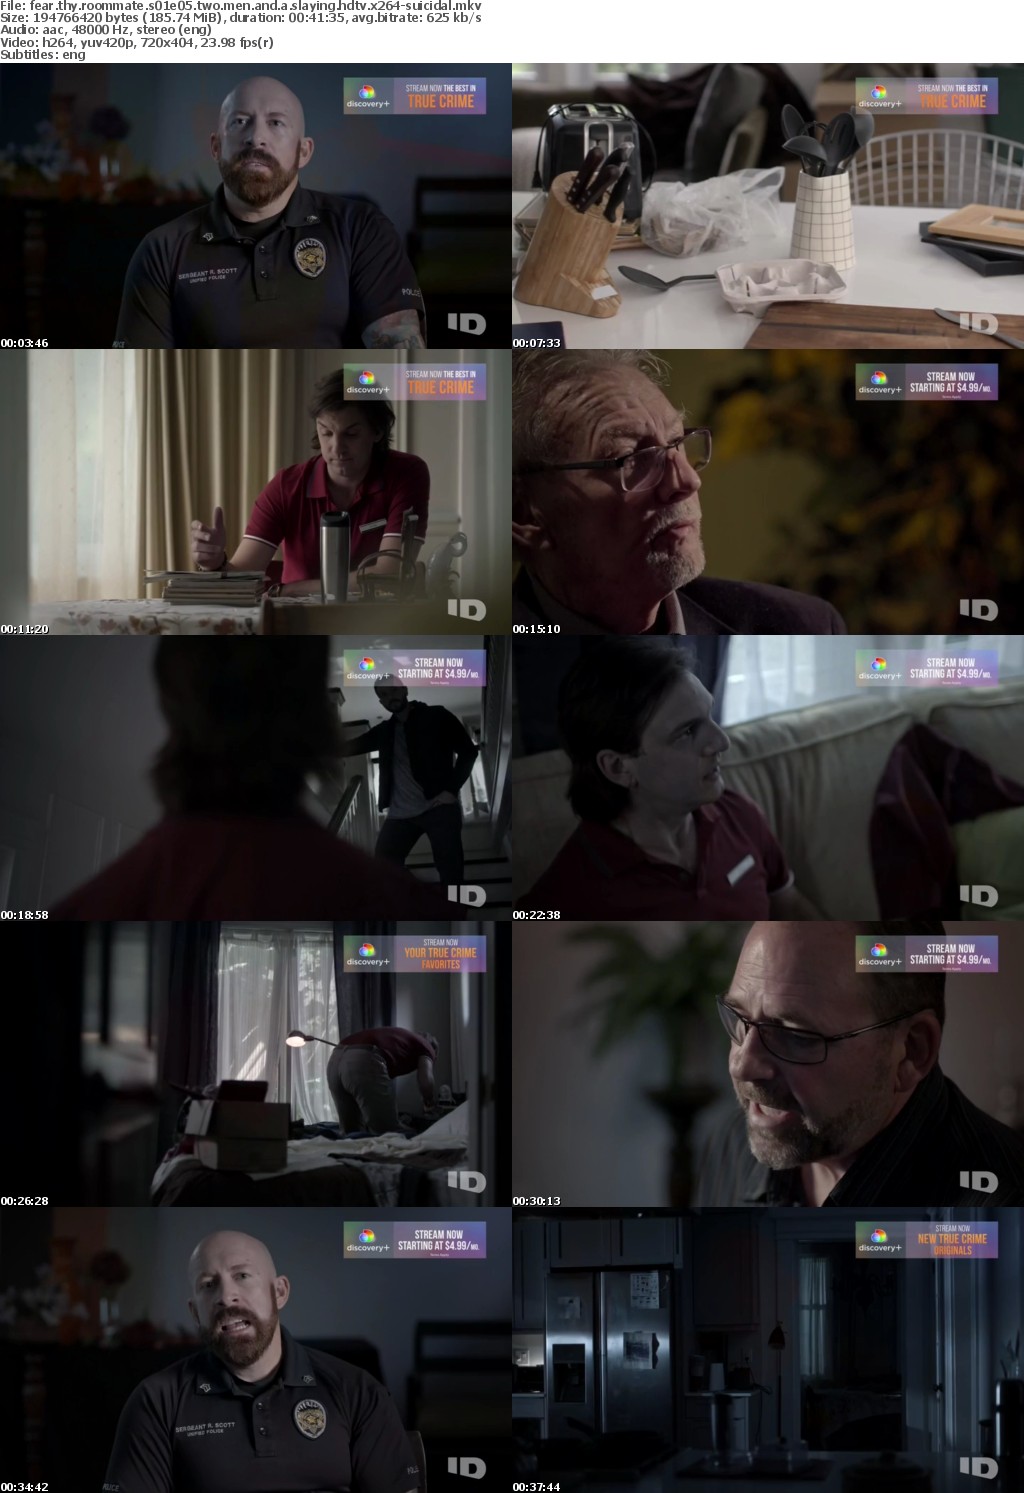 Fear Thy Roommate S01E05 Two Men and a Slaying HDTV x264-SUiCiDAL